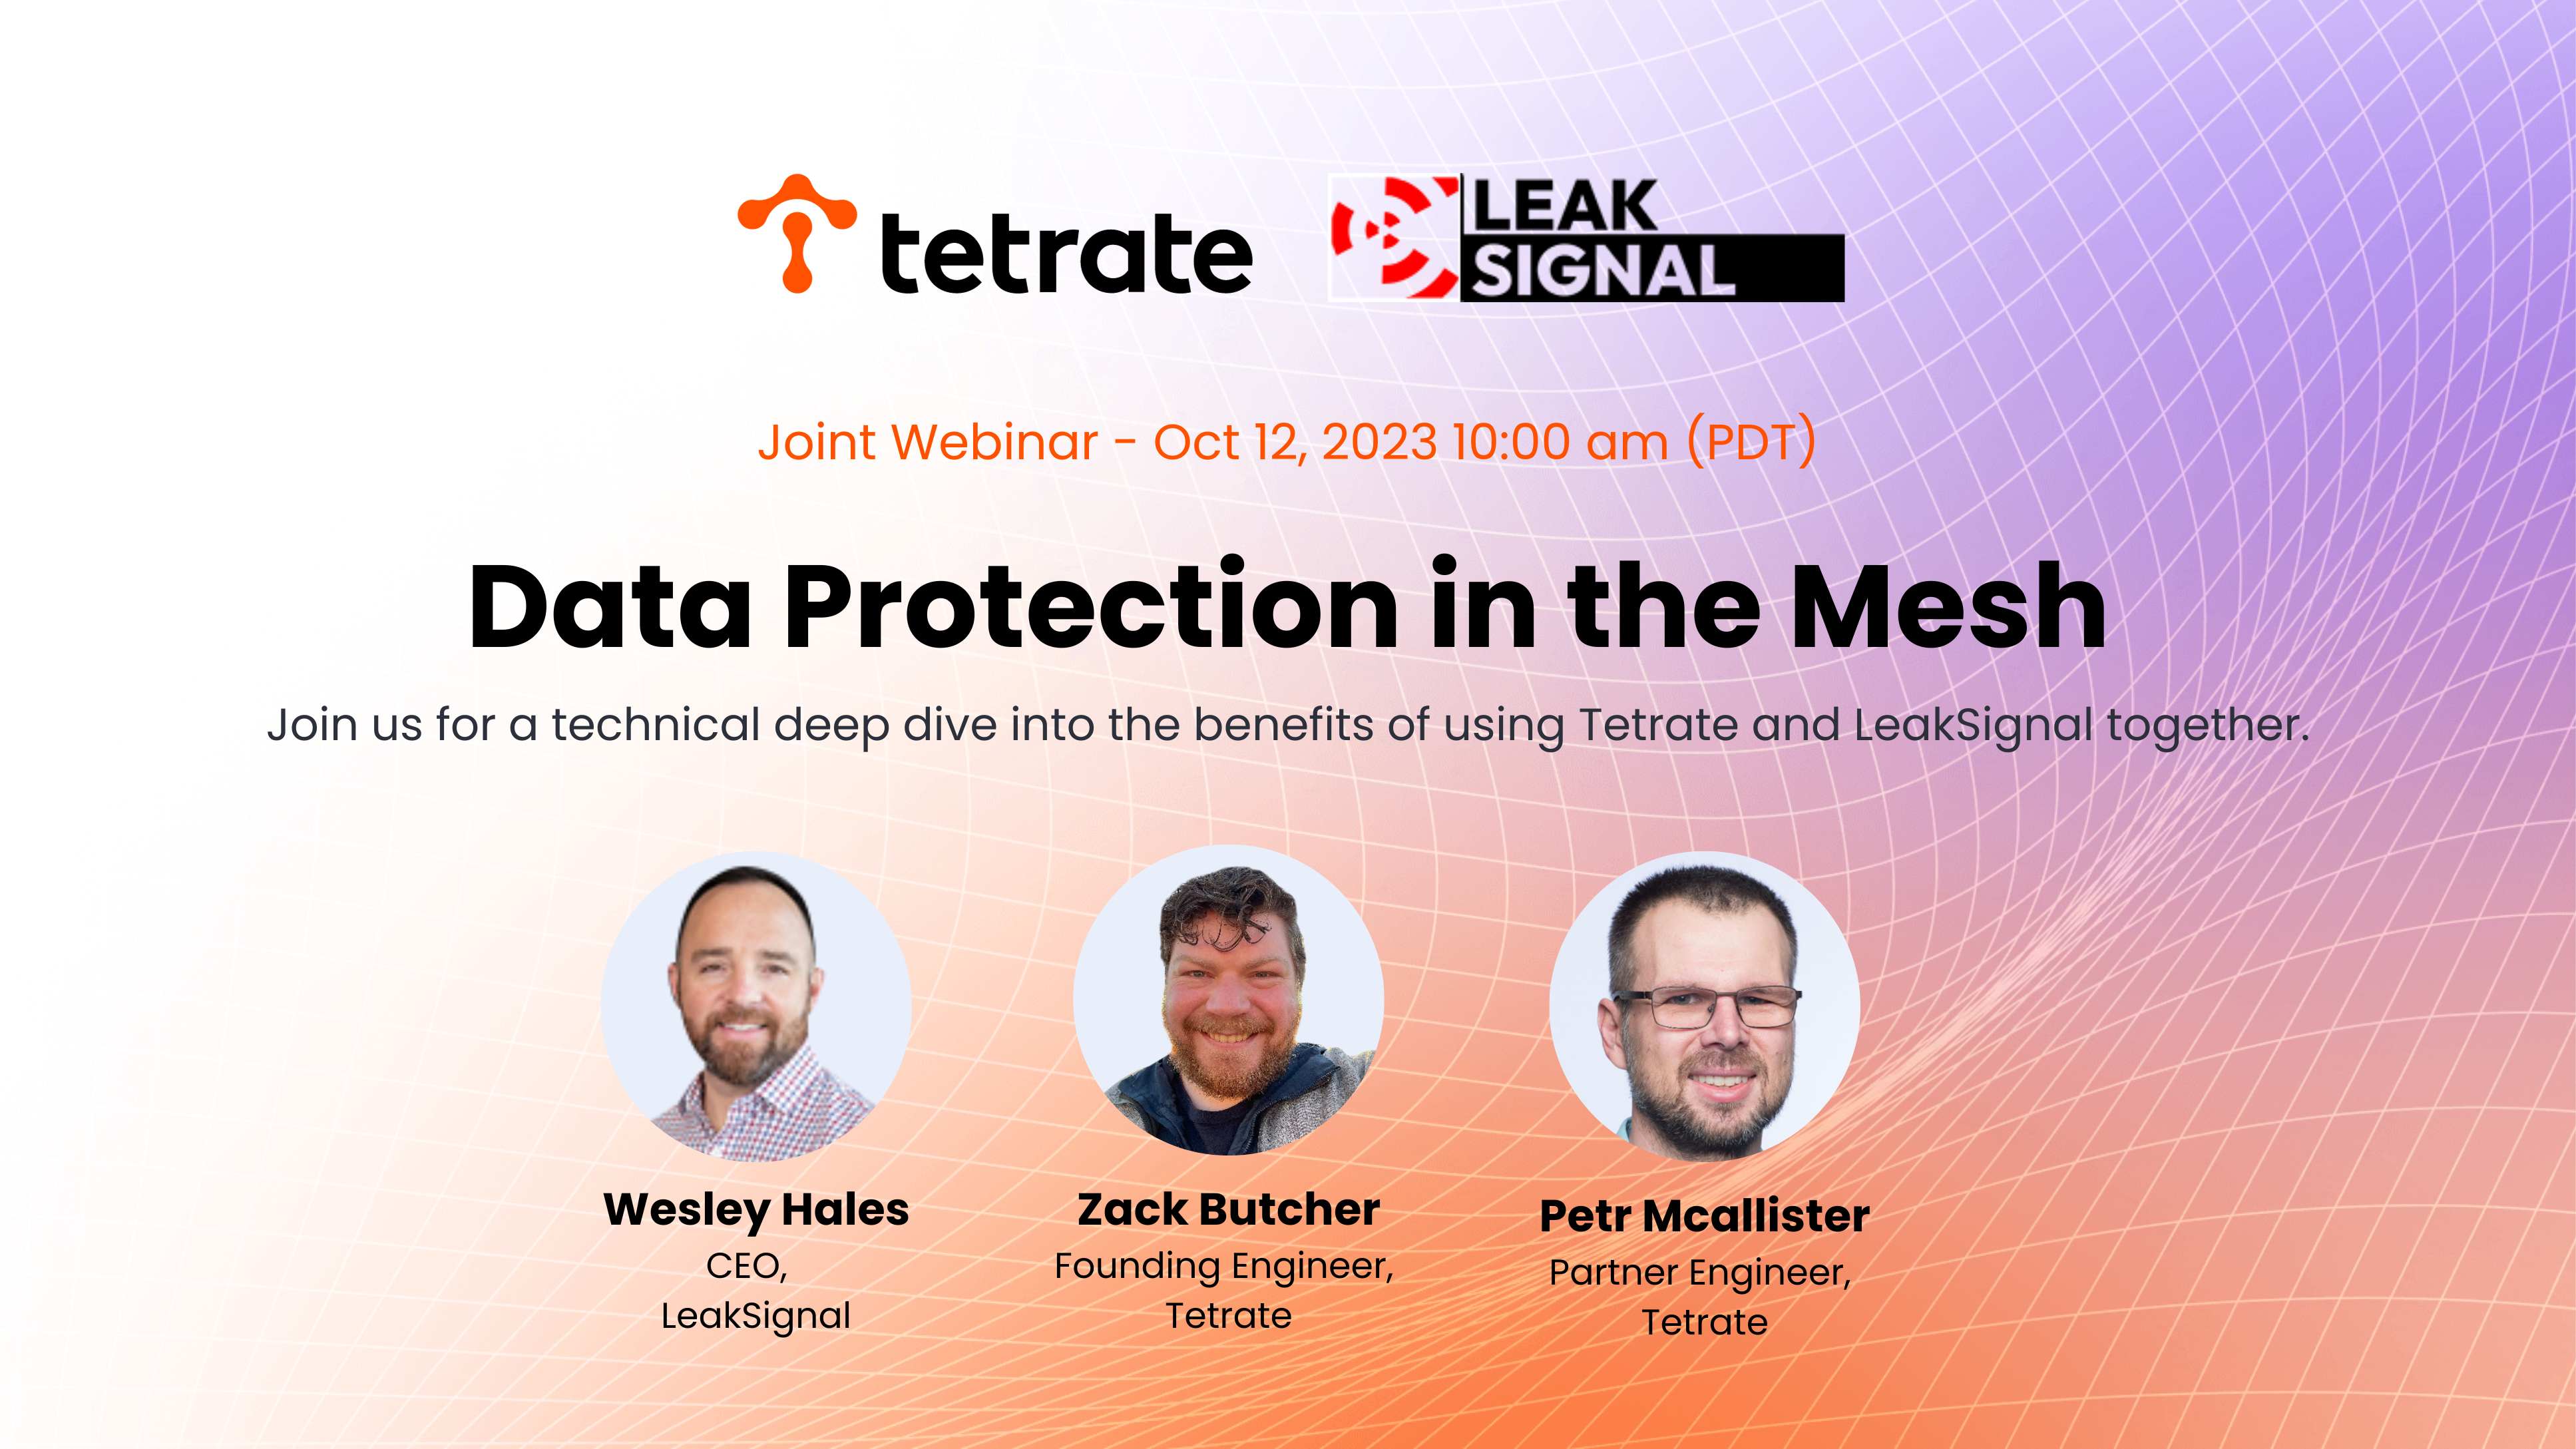 Data Protection in the Mesh with Tetrate and LeakSignal